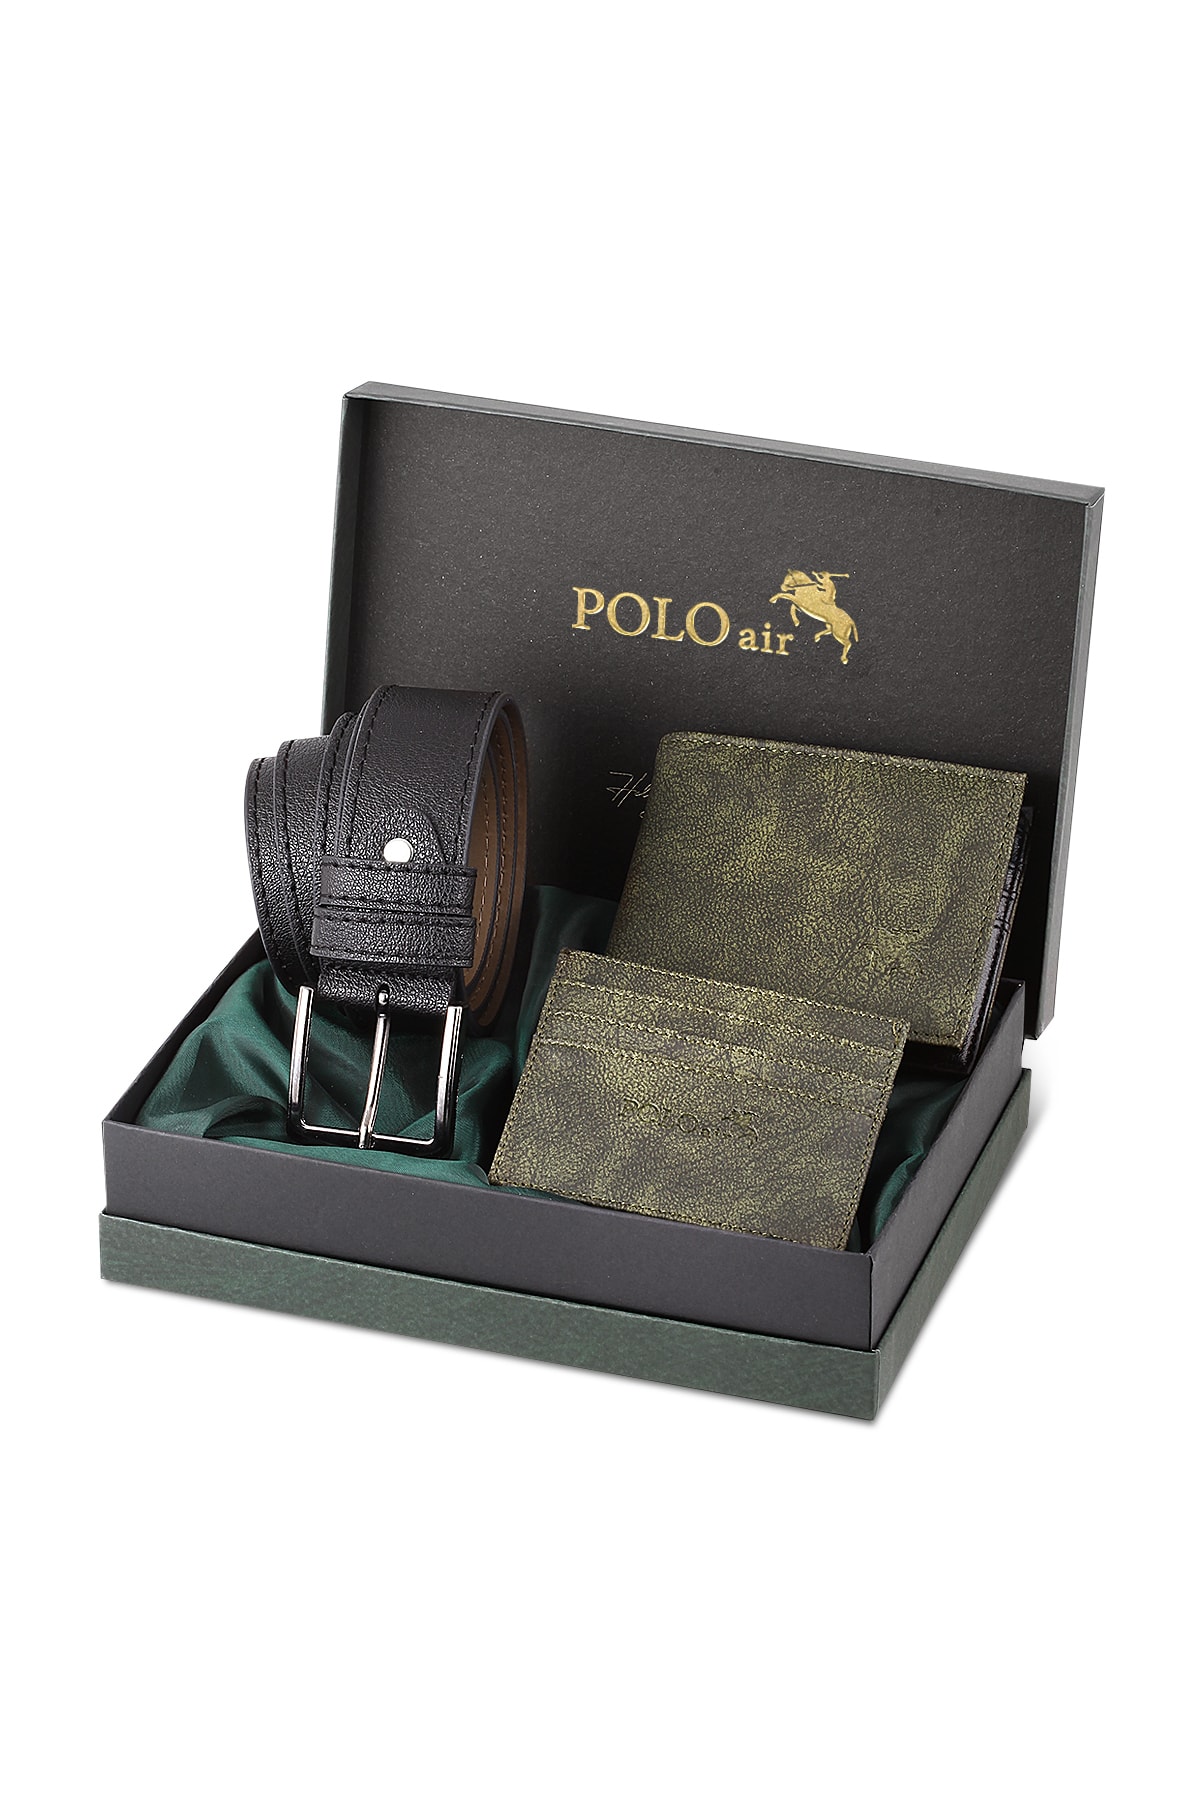 Polo Air Belt Wallet Card Holder Green Set In Gift Box